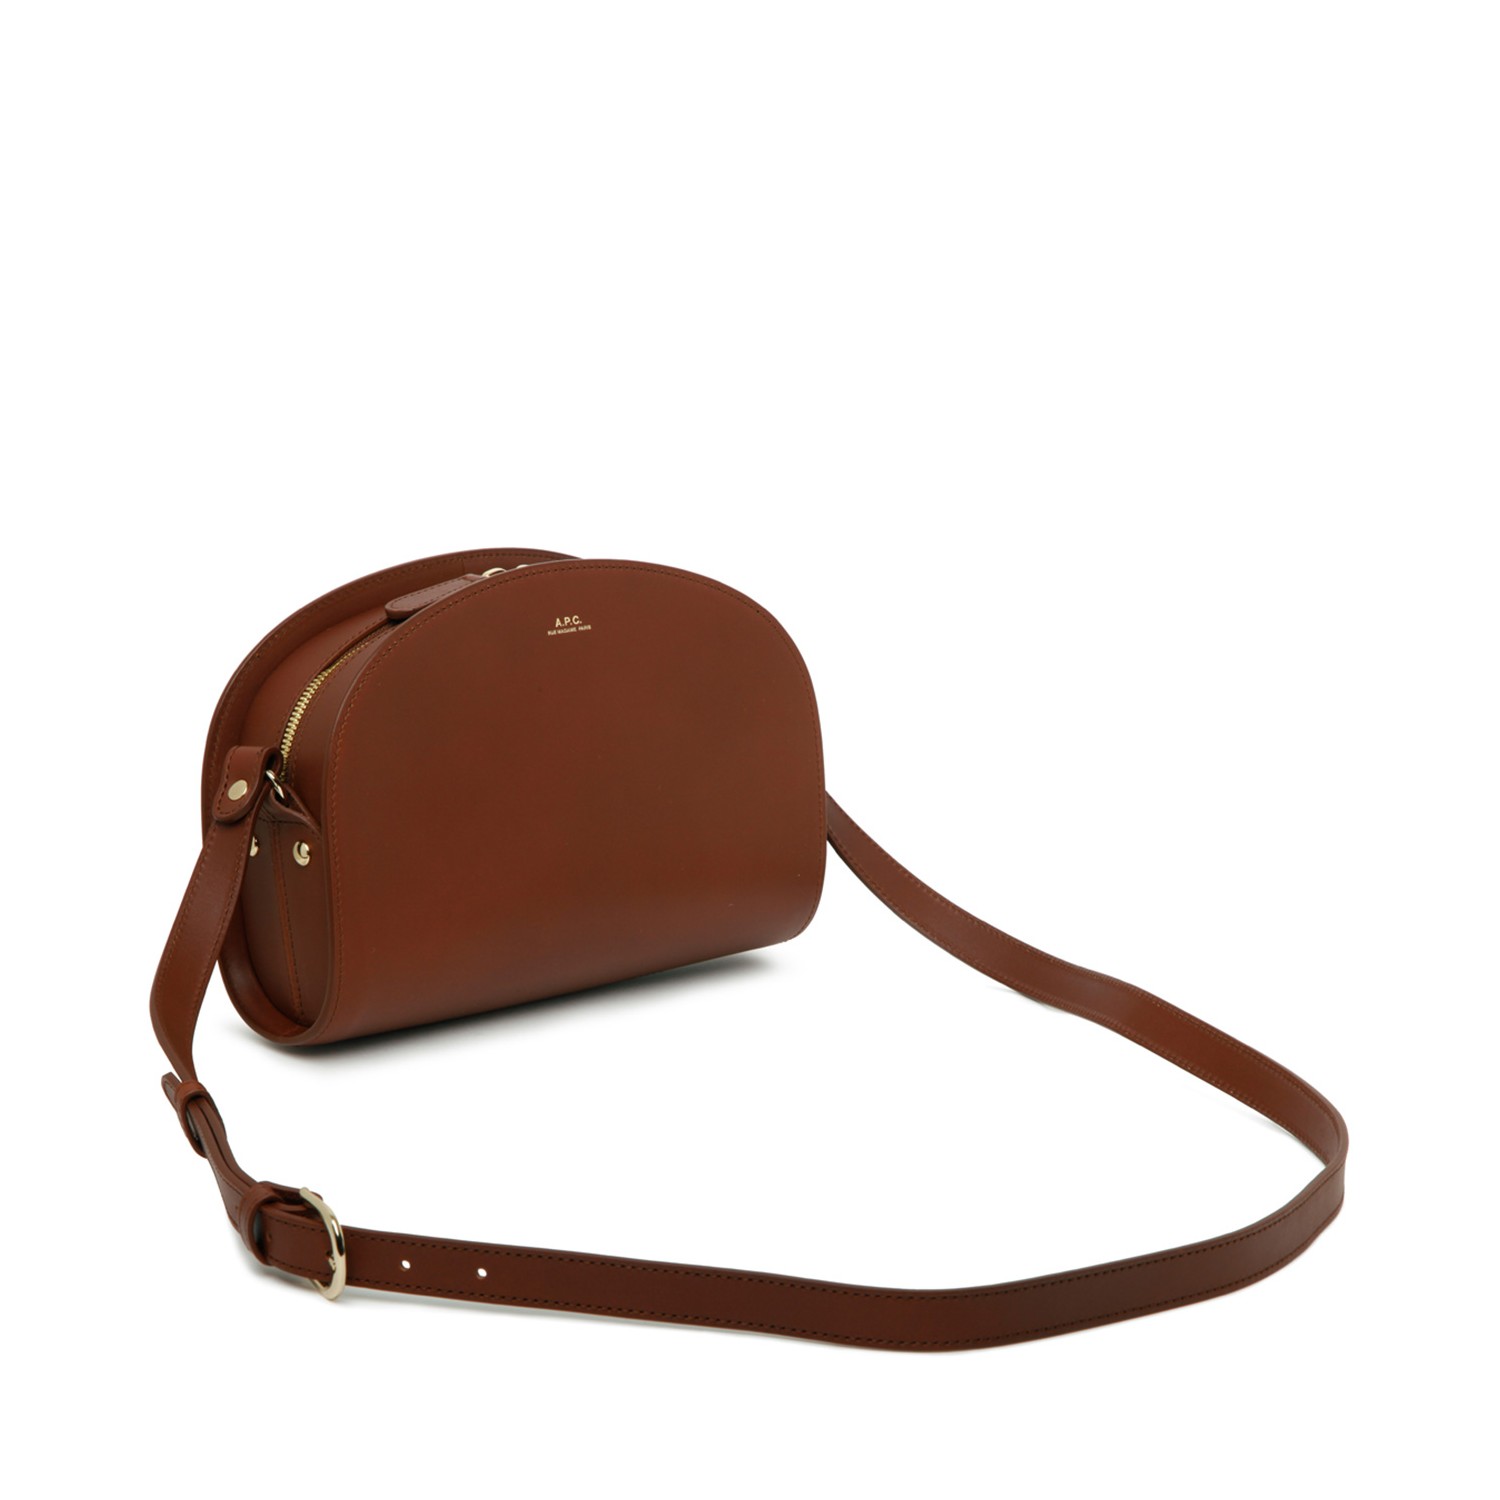 Demi Lune Leather Shoulder Bag in Gold - A P C